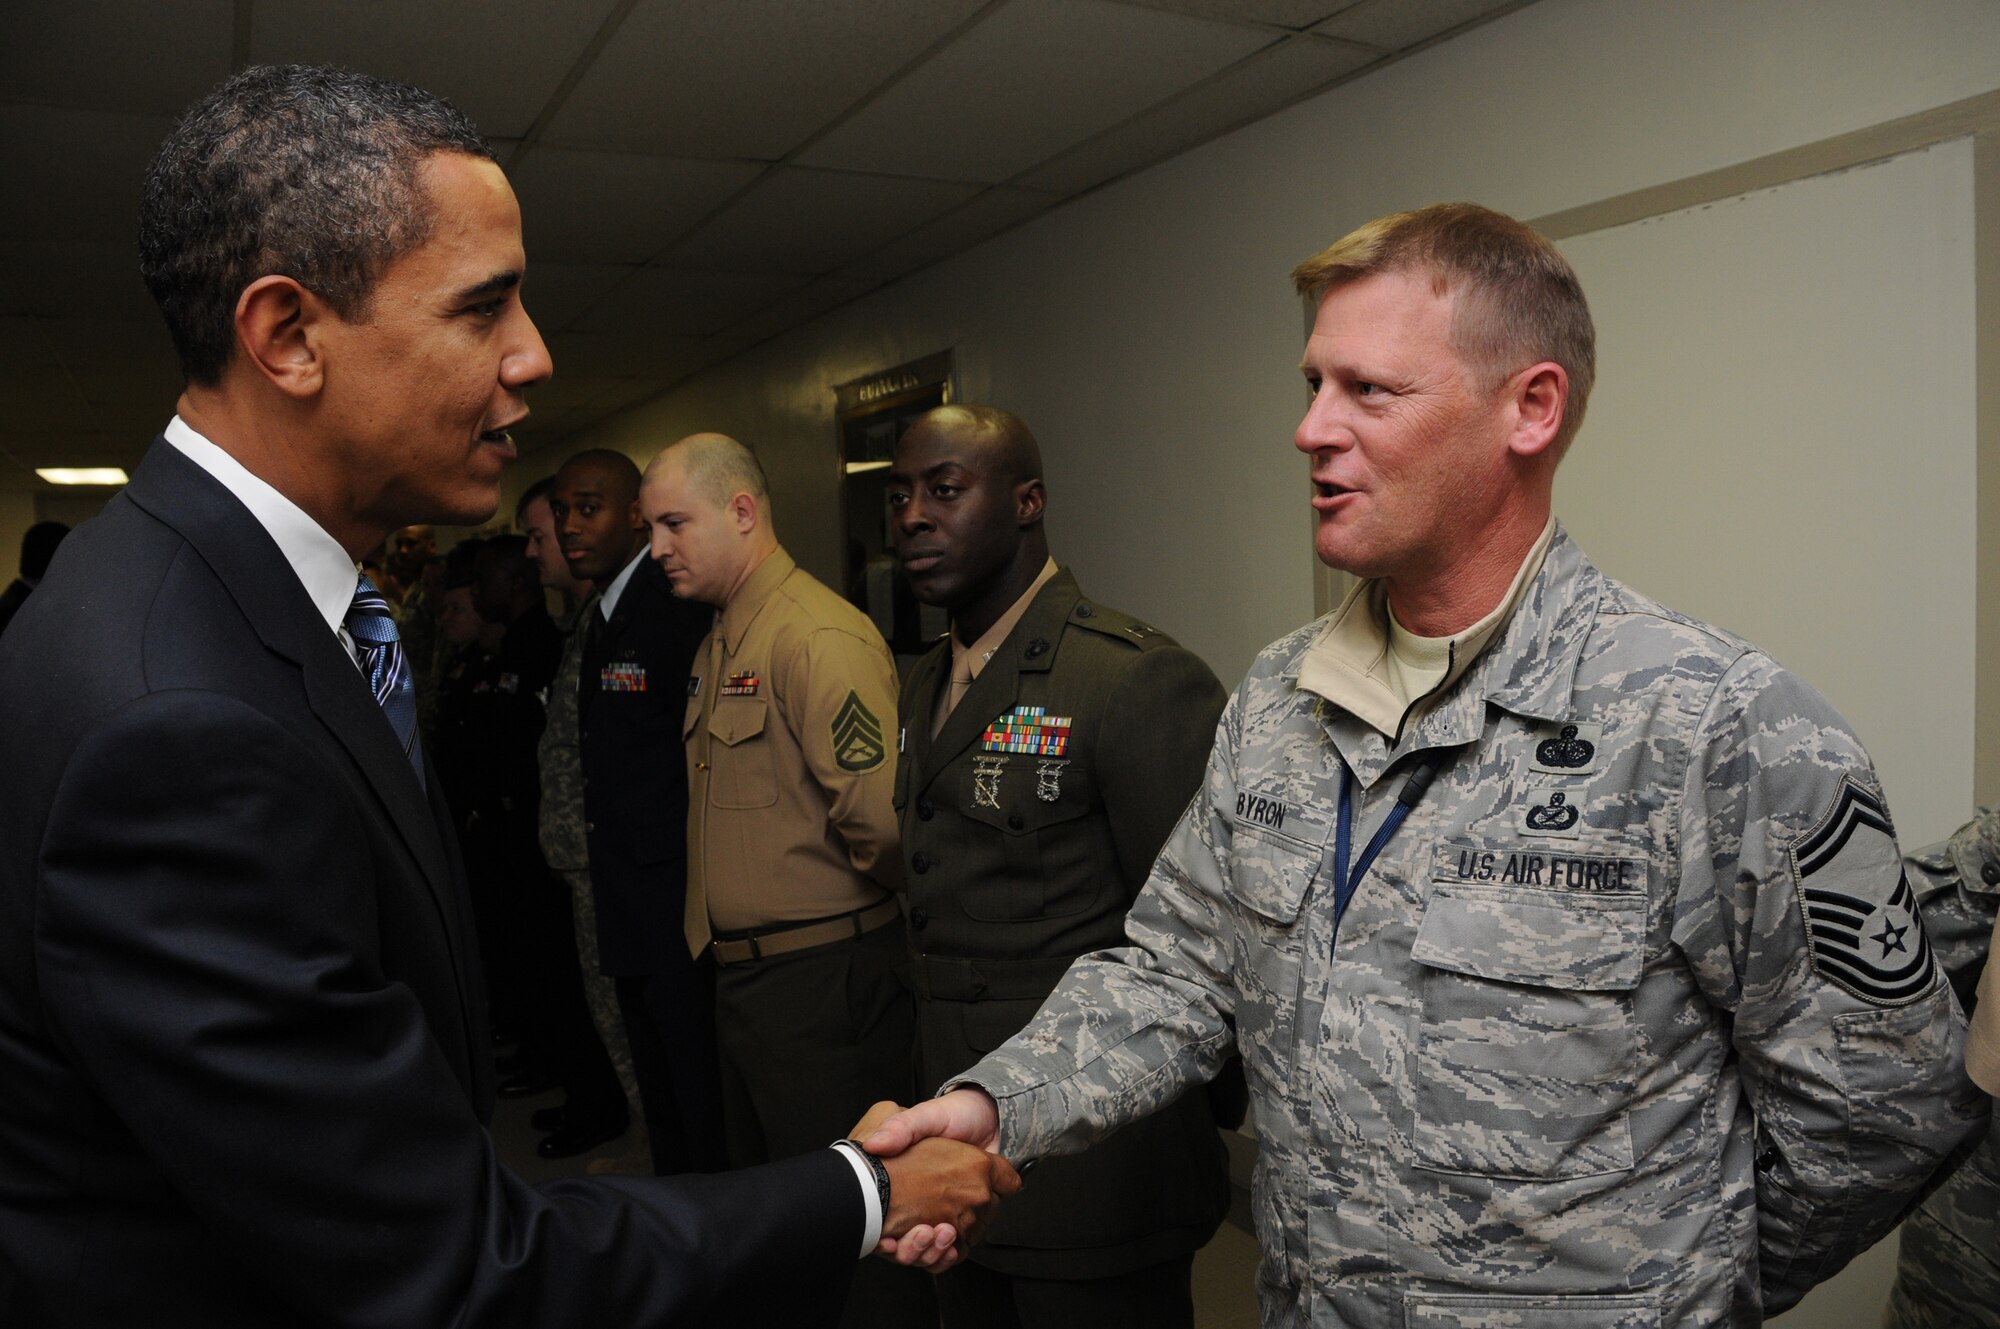 U.S. President-elect Barack Obama shakes hands with Senior Master Sgt. David Byron, an Air Force reservist and Armed Forces Inaugural Committee member, in Washington, D.C., Jan. 8, 2009. AFIC carries on a tradition, which dates back more than 200 years, of honoring the new commander in chief and recognizing civilian control of the military. AFIC is a joint-service organization responsible for providing military ceremonial support to the 56th Presidential Inauguration, which will take place on Jan. 20, 2009. (U.S. Coast Guard photo\Petty Officer 1st Class Kyle Niemi)
